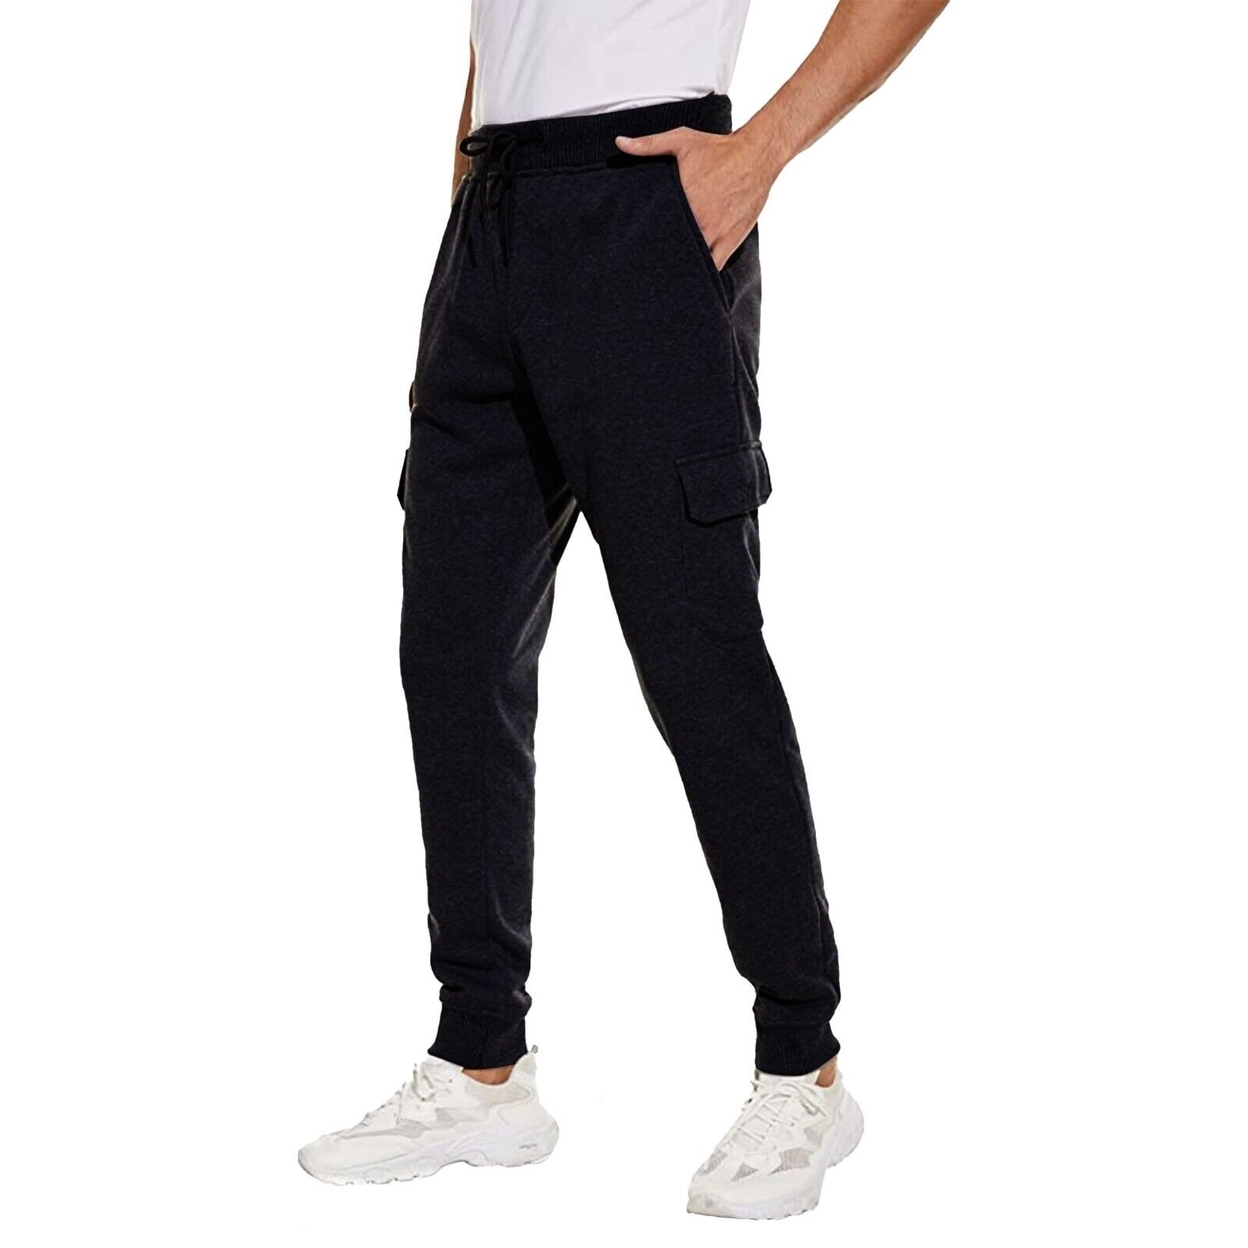 Men's Ultra Soft Winter Warm Thick Sweat Pant Athletic Sherpa Lined Jogger Pants - Navy, X-large